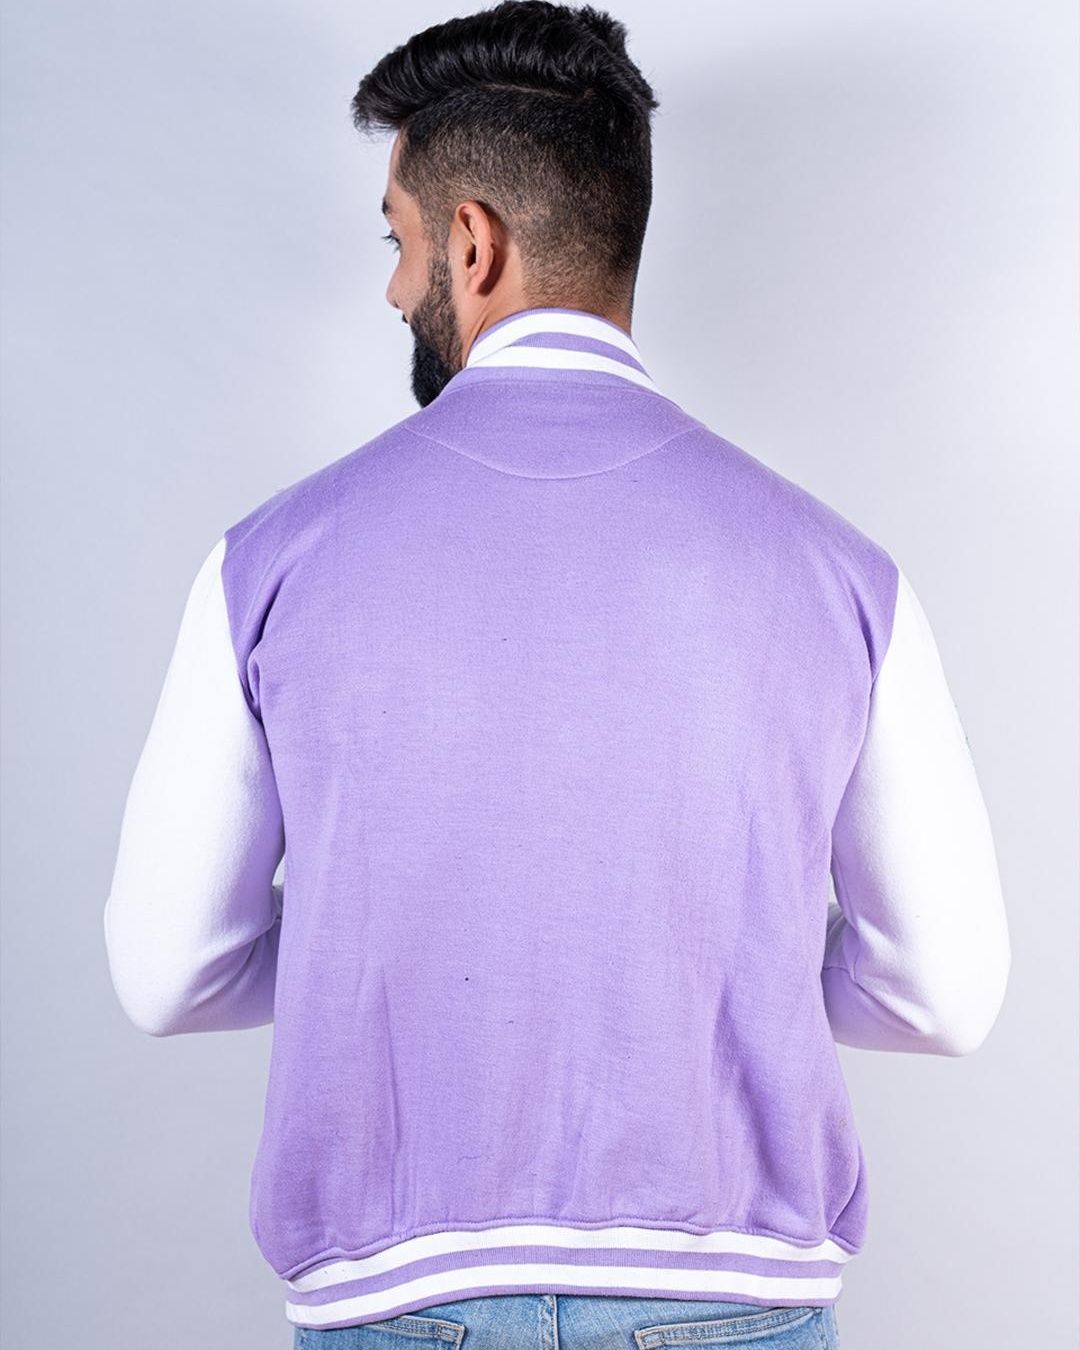 Buy Men's Purple & White R Color Block Relaxed Fit Varsity Jacket